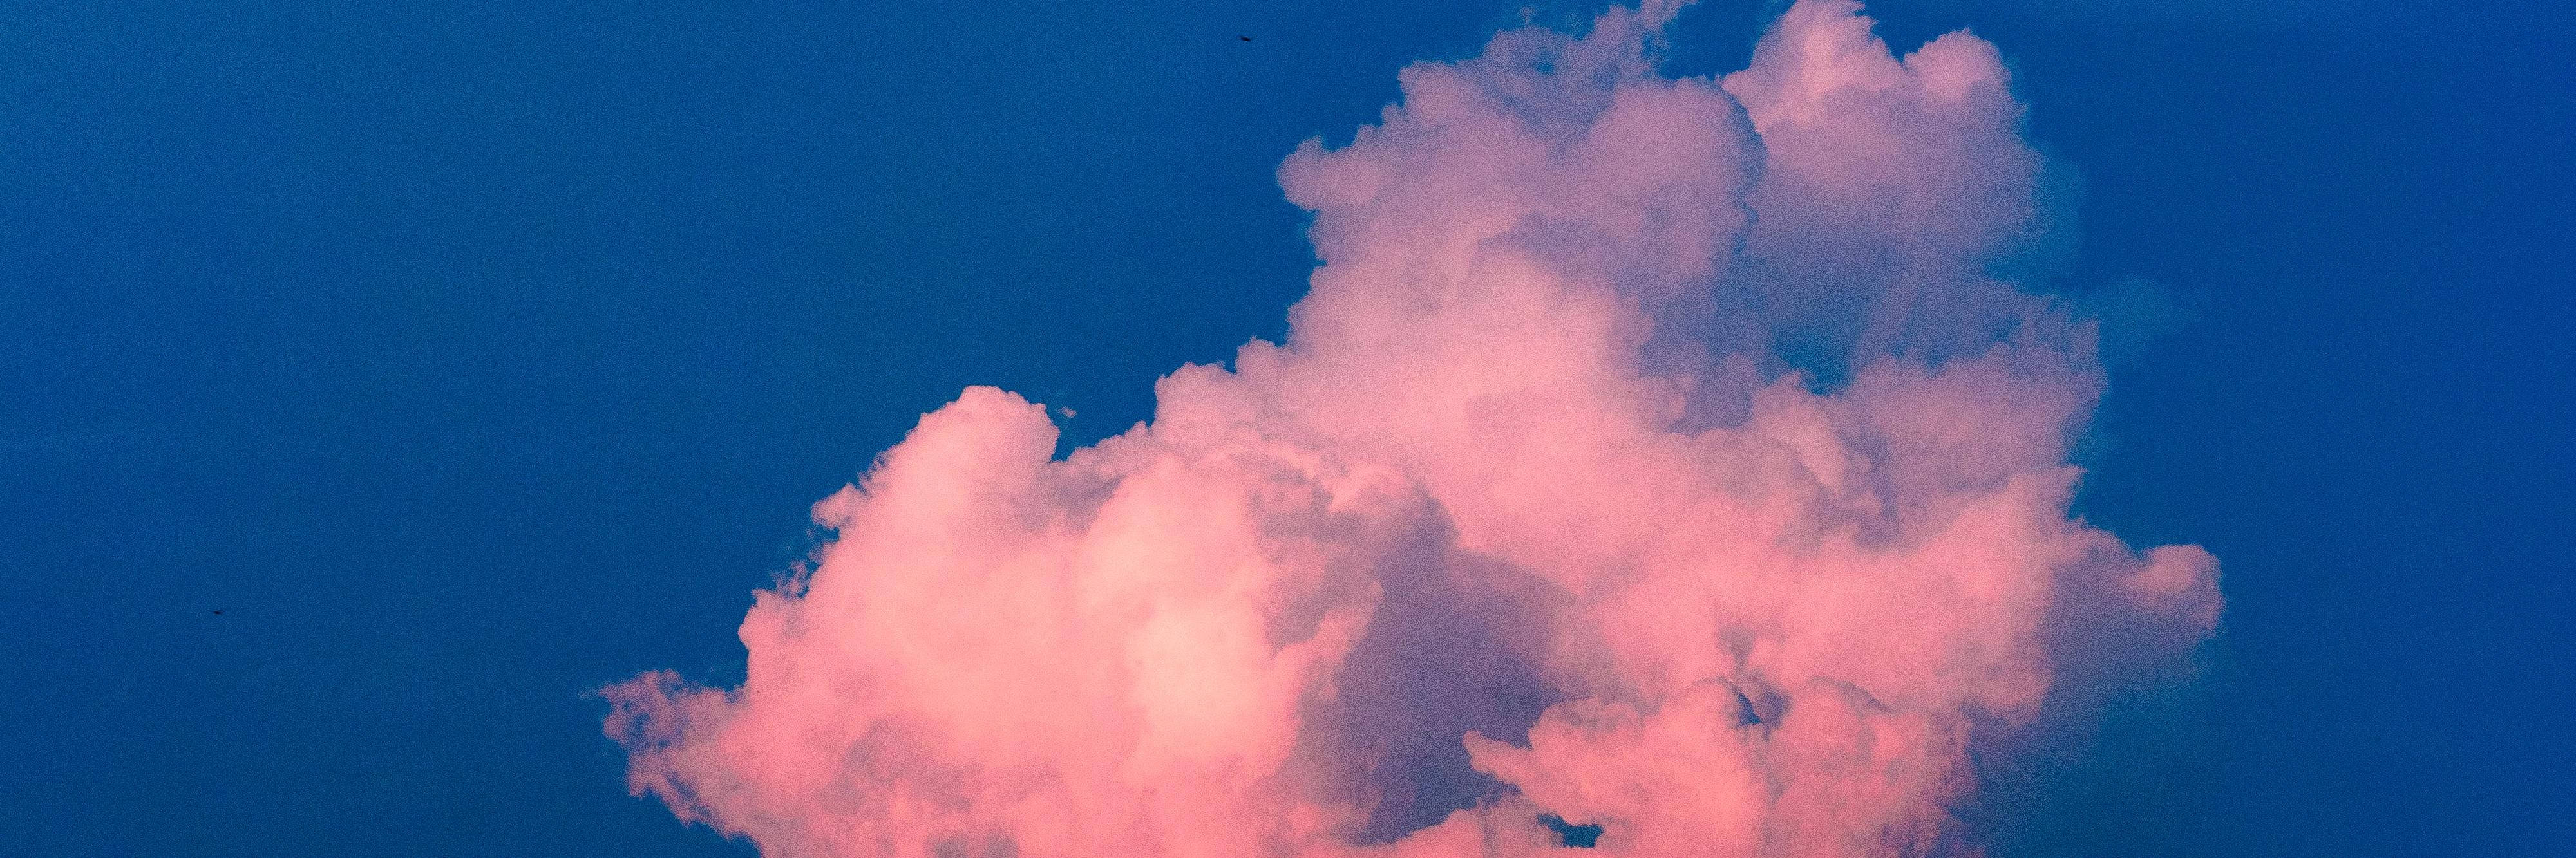 Thick Vintage Aesthetic Cloud Wallpaper